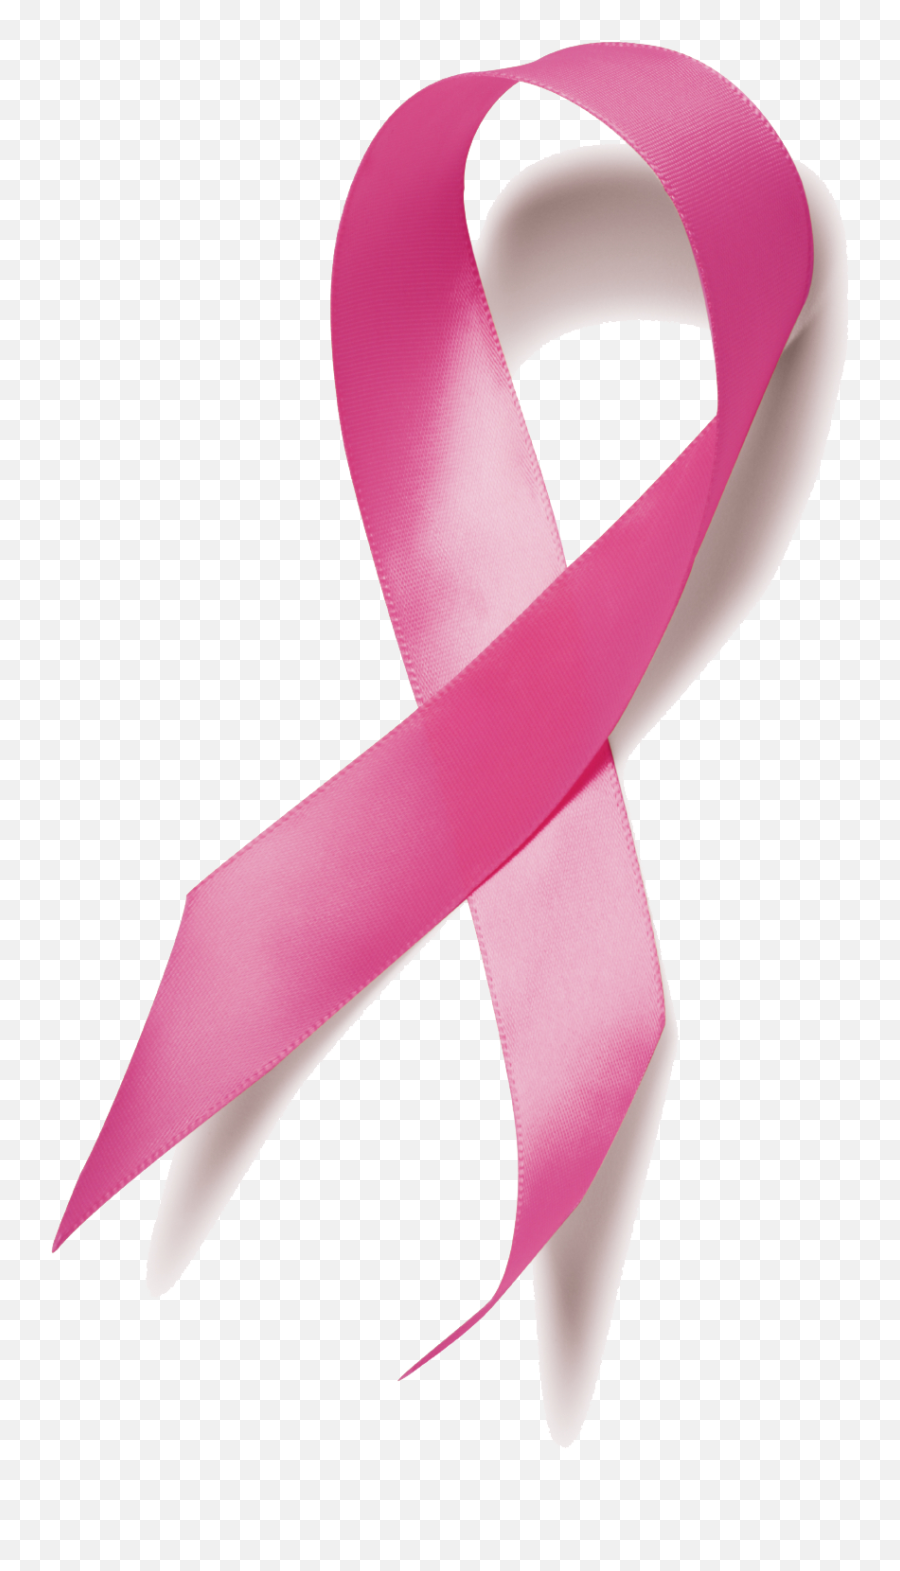 Download Free Png Breast Cancer Ribbon Transparent - Breast Cancer Ribbon Realistic,Awareness Ribbon Png